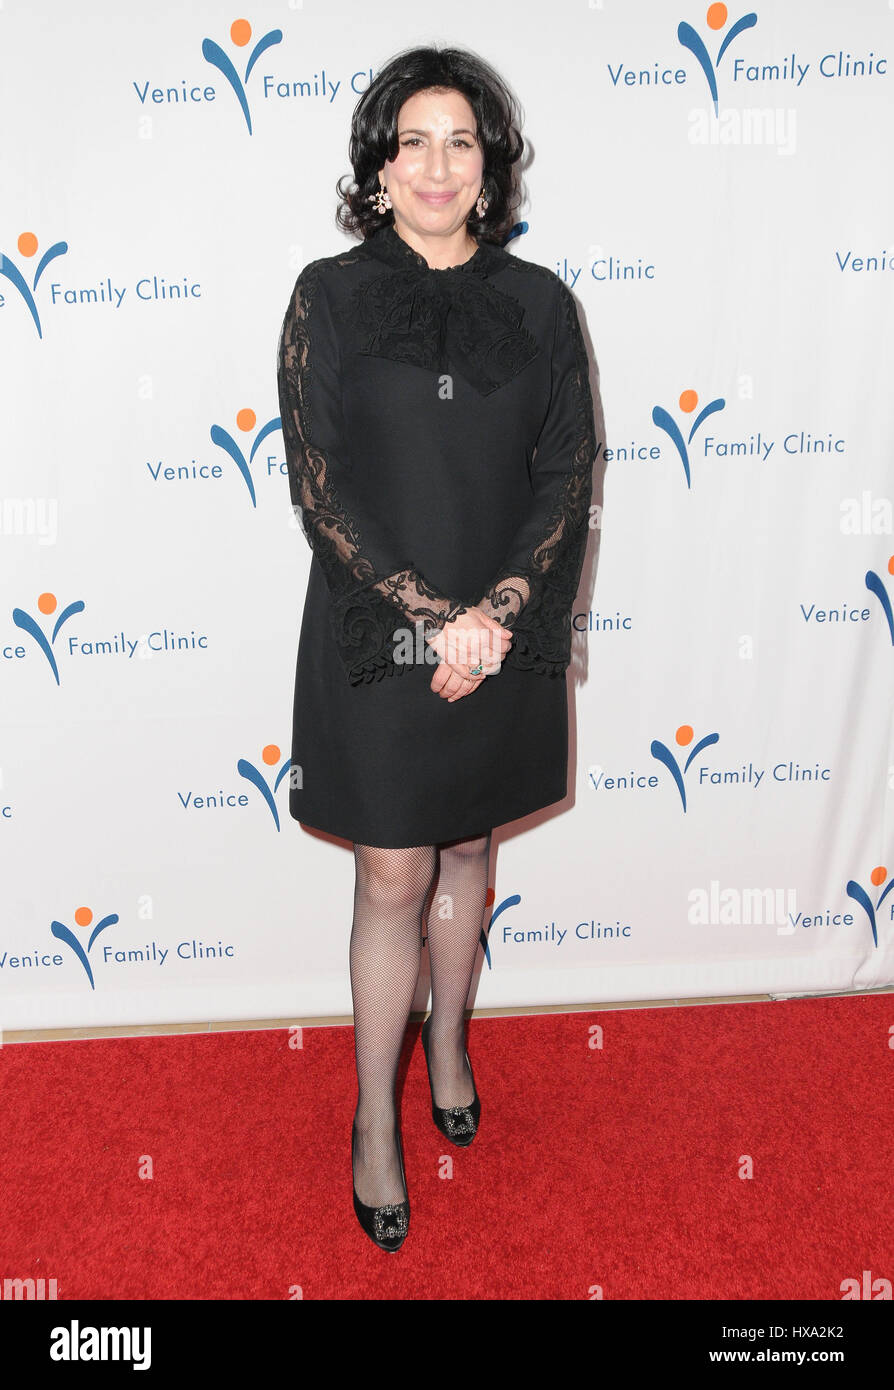 Beverly Hills, CA, USA. 26th Mar, 2017. 26 March 2017 - Beverly Hills, California - Sue Kroll. The Venice Family Clinic Silver Circle Gala held at The Beverly Hilton Hotel in Beverly Hills. Photo Credit: Birdie Thompson/AdMedia/ZUMA Wire/Alamy Live News Stock Photo